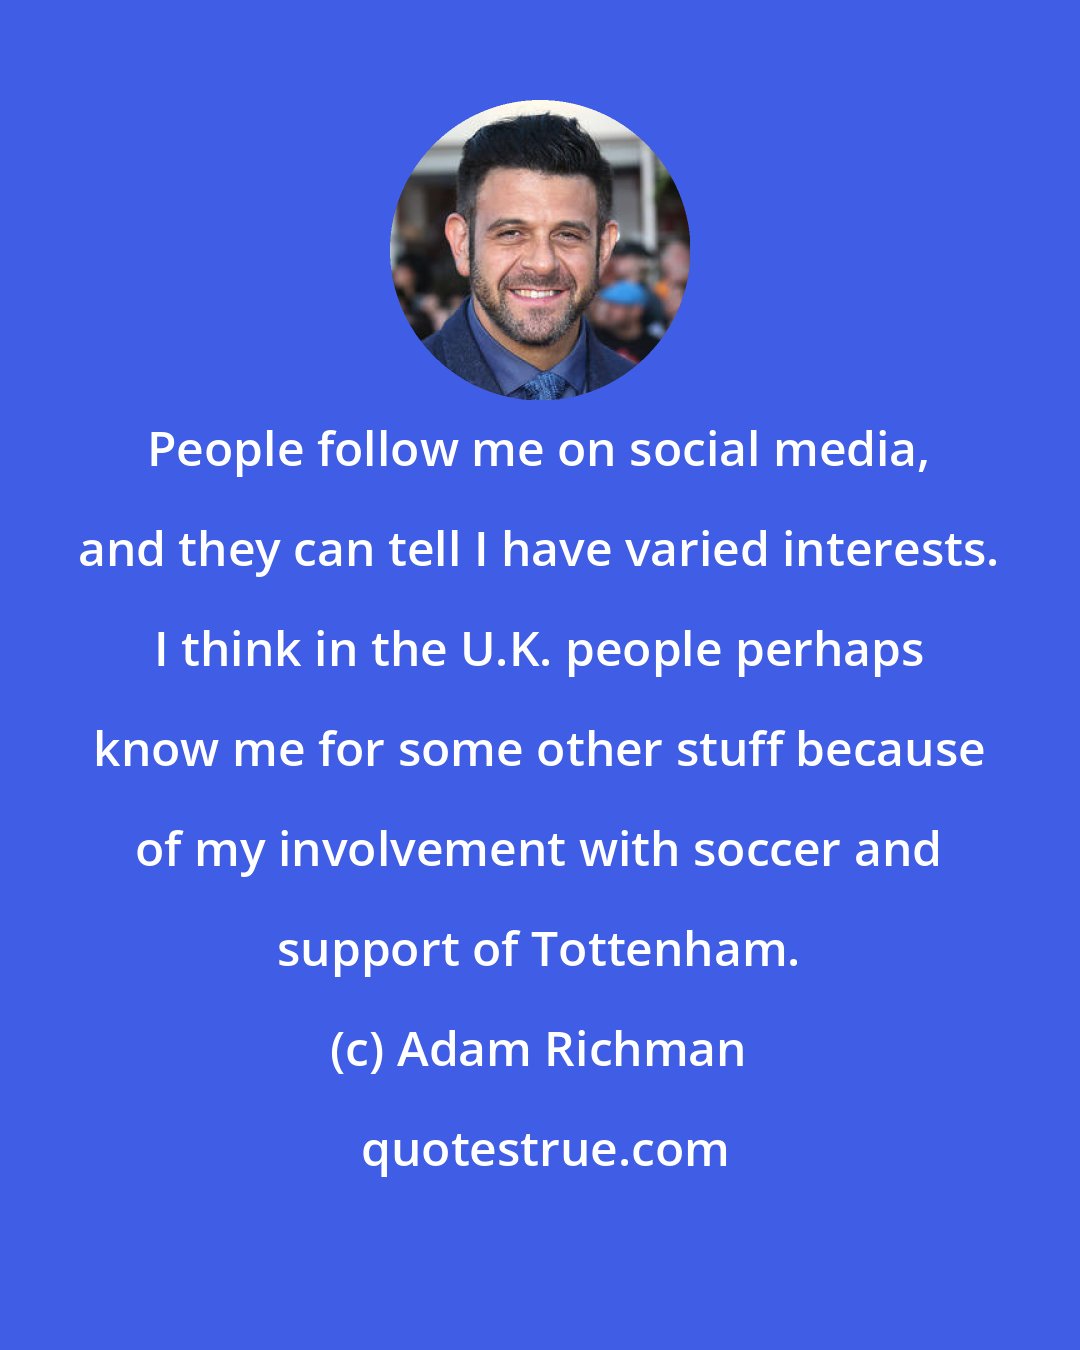 Adam Richman: People follow me on social media, and they can tell I have varied interests. I think in the U.K. people perhaps know me for some other stuff because of my involvement with soccer and support of Tottenham.